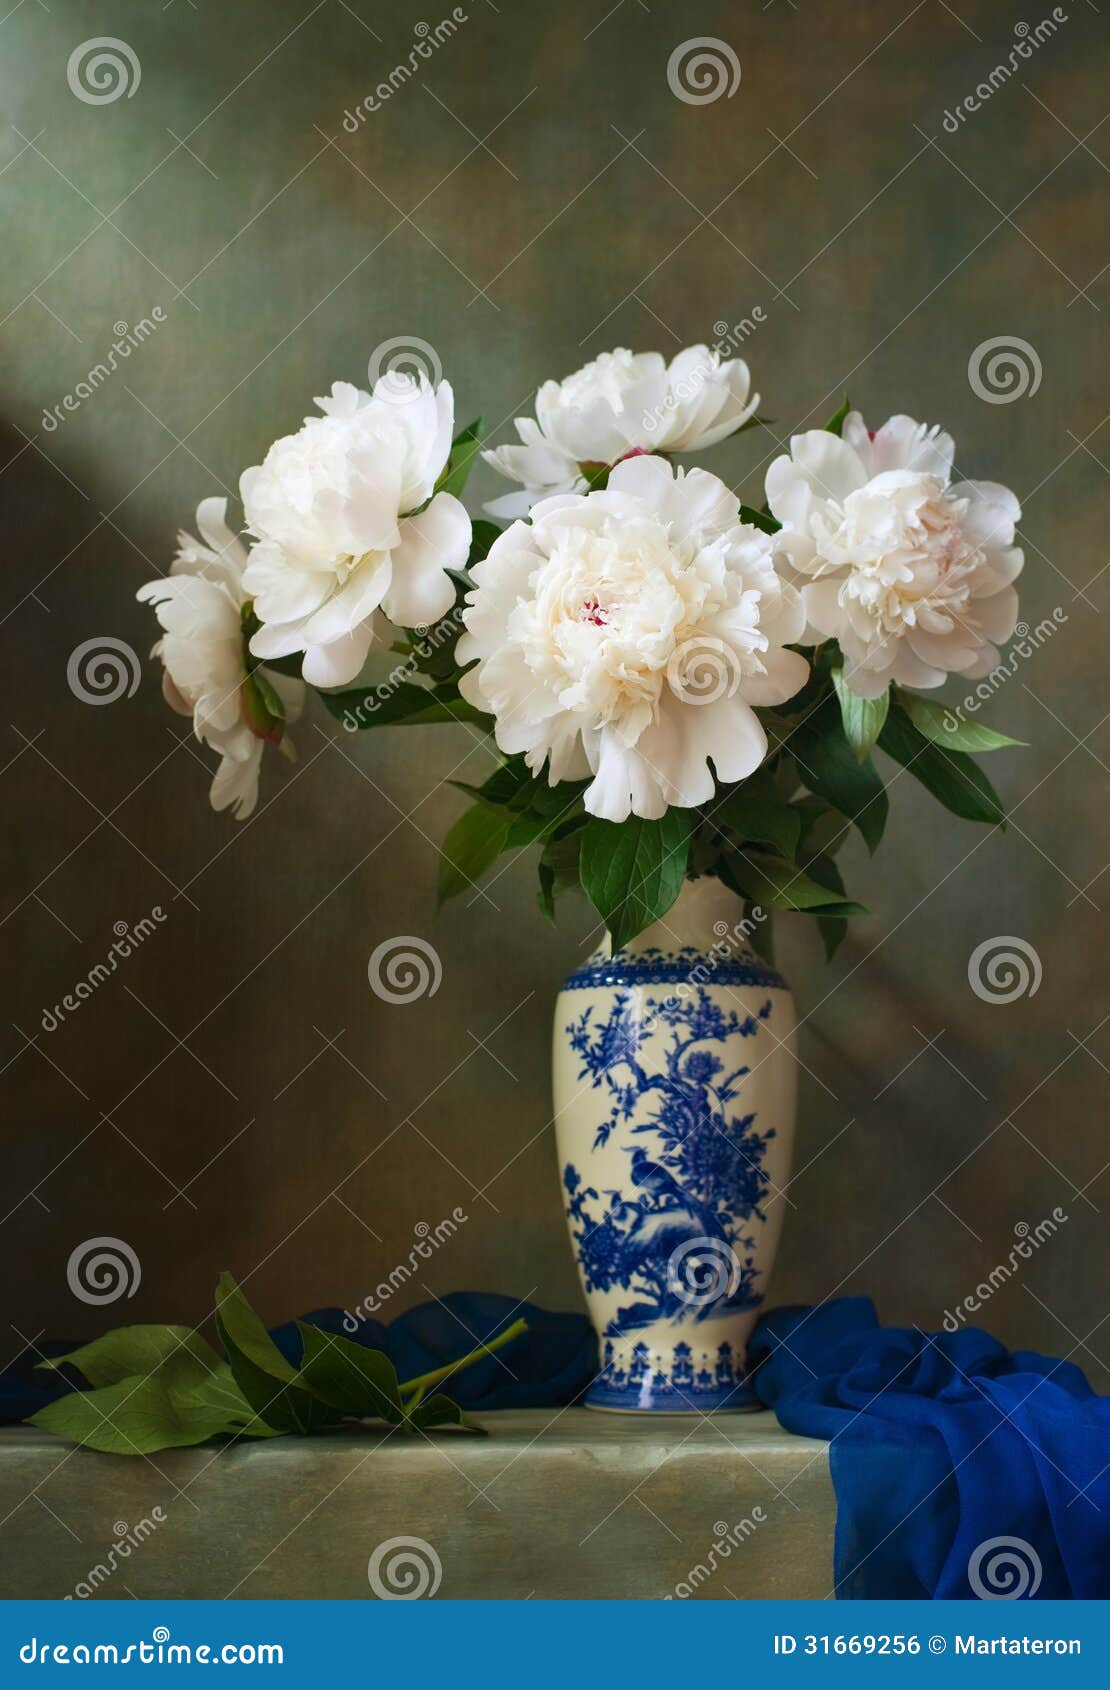 still life with white peonies